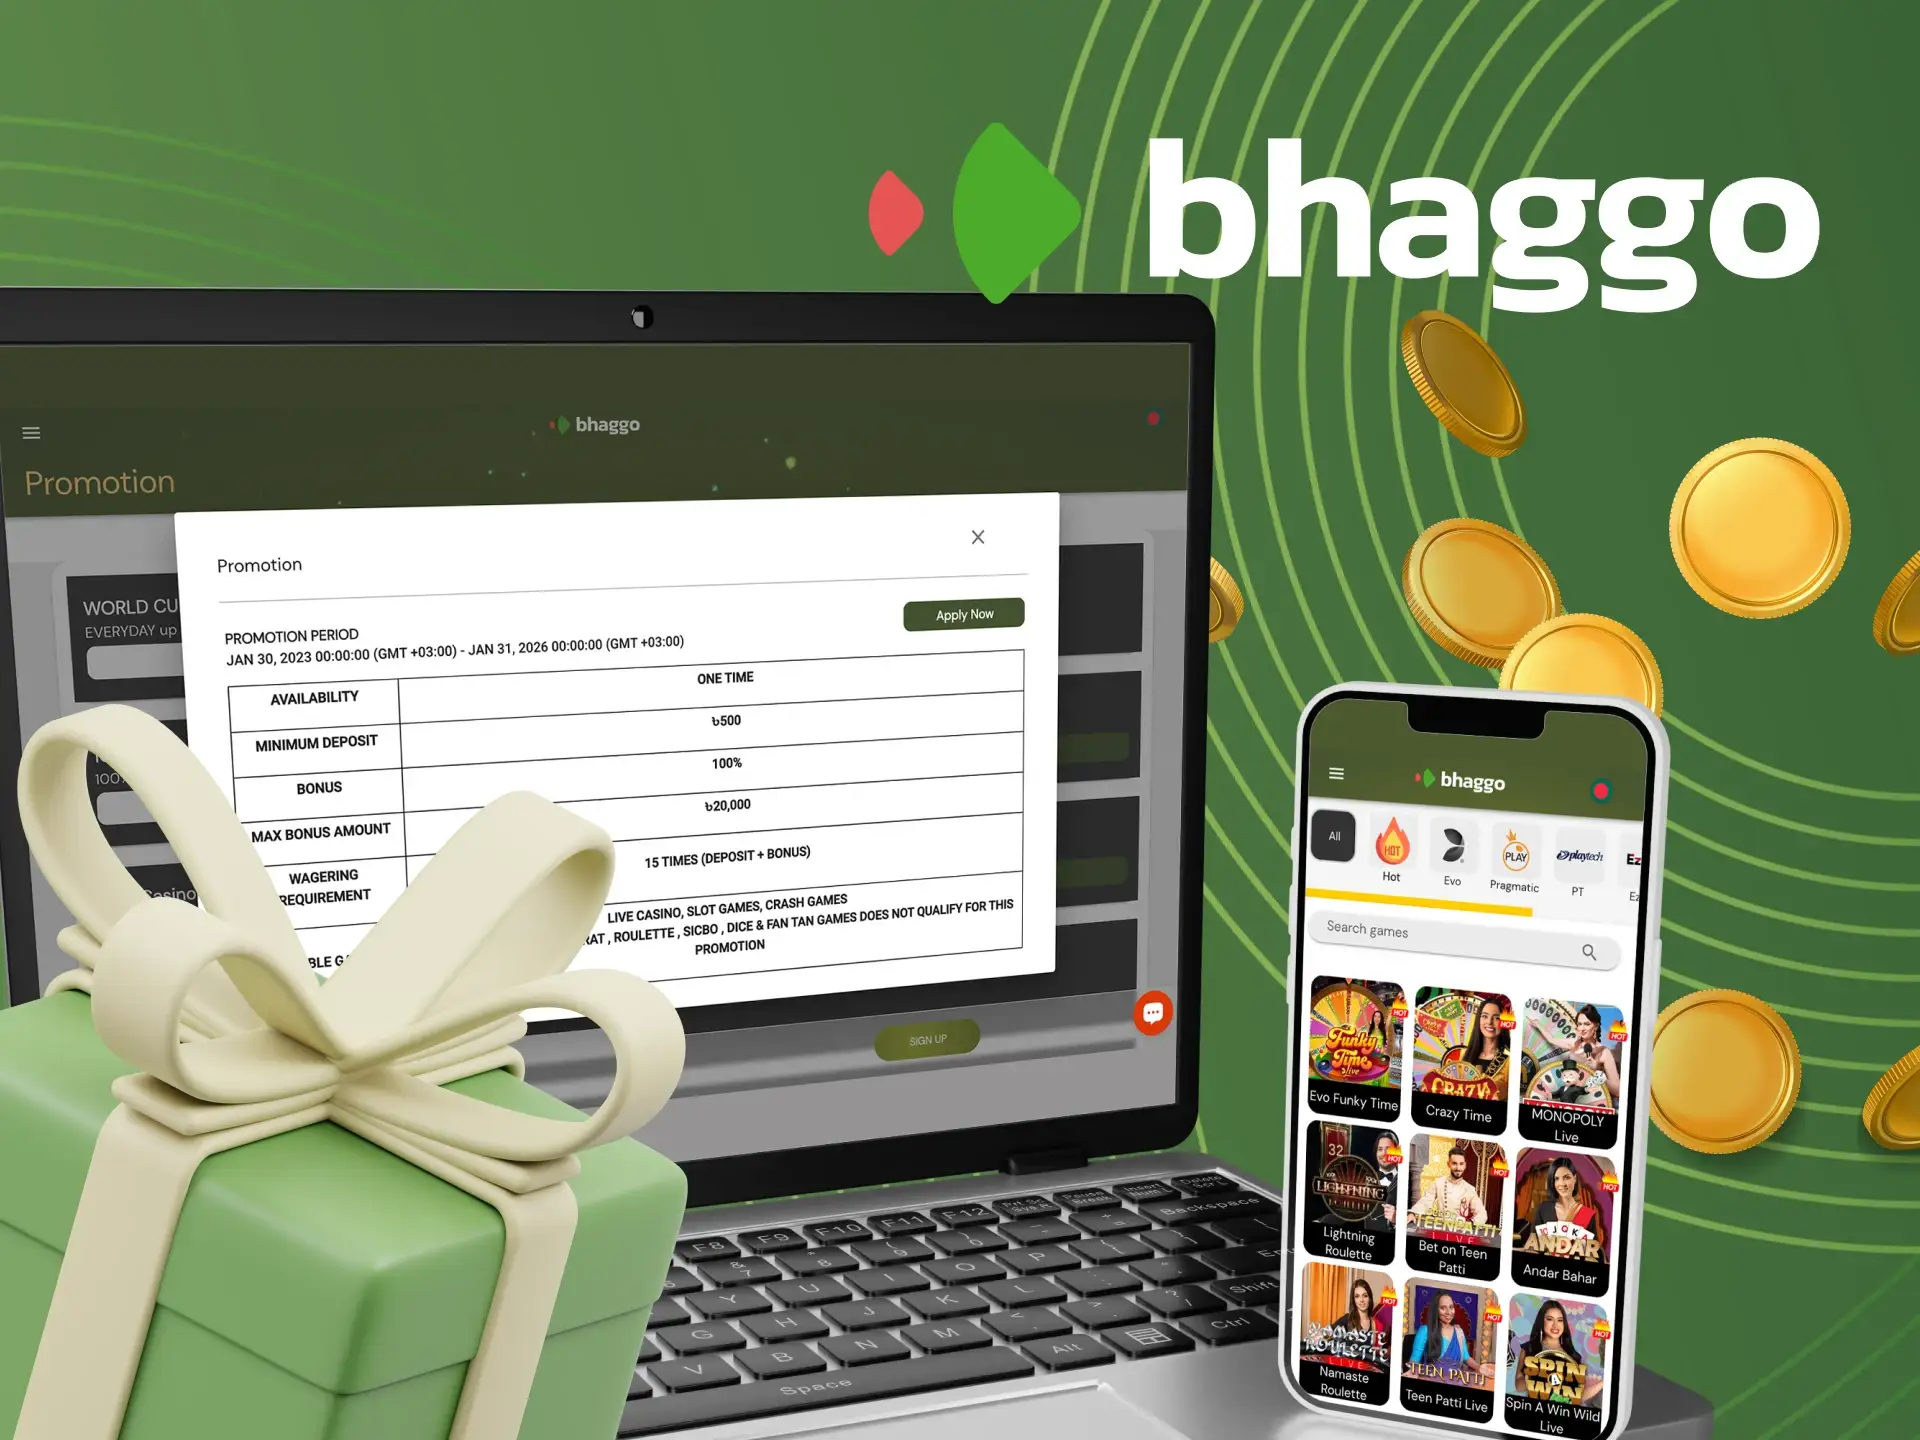 Promotions for players at Bhaggo live casino.